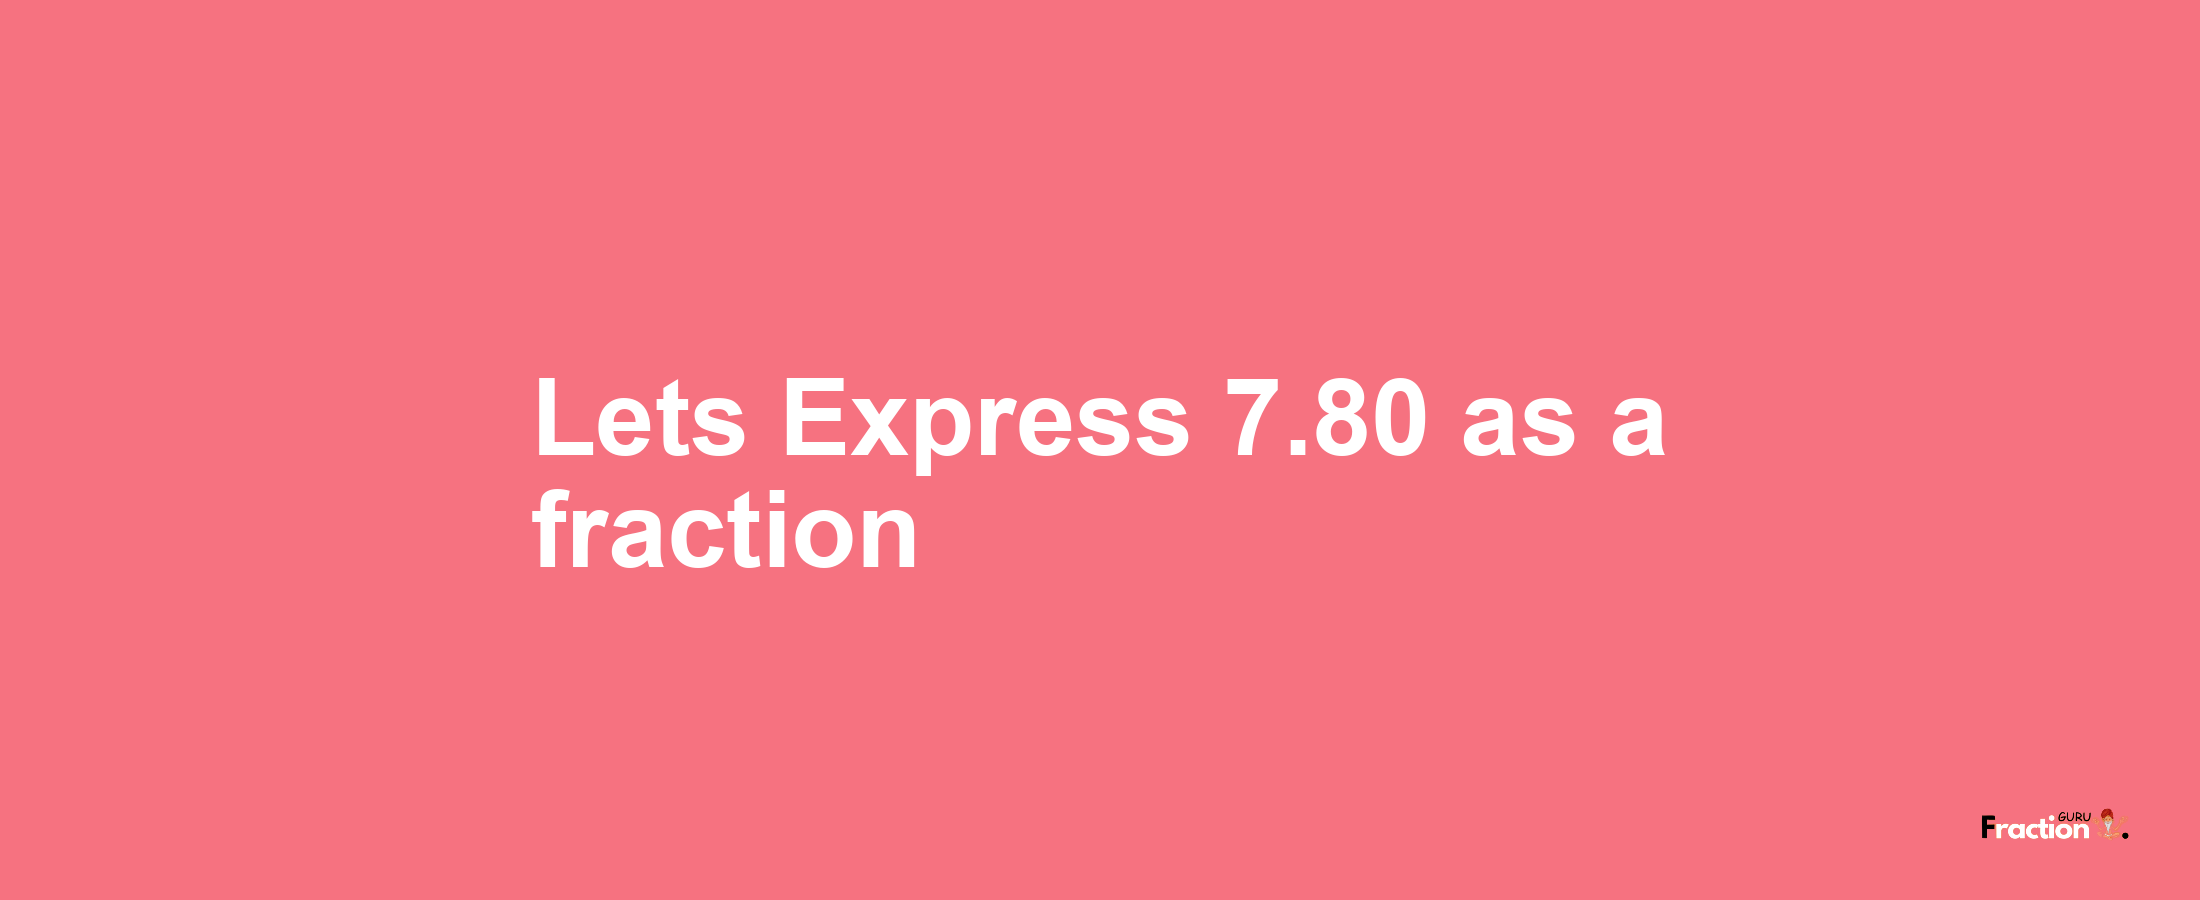 Lets Express 7.80 as afraction